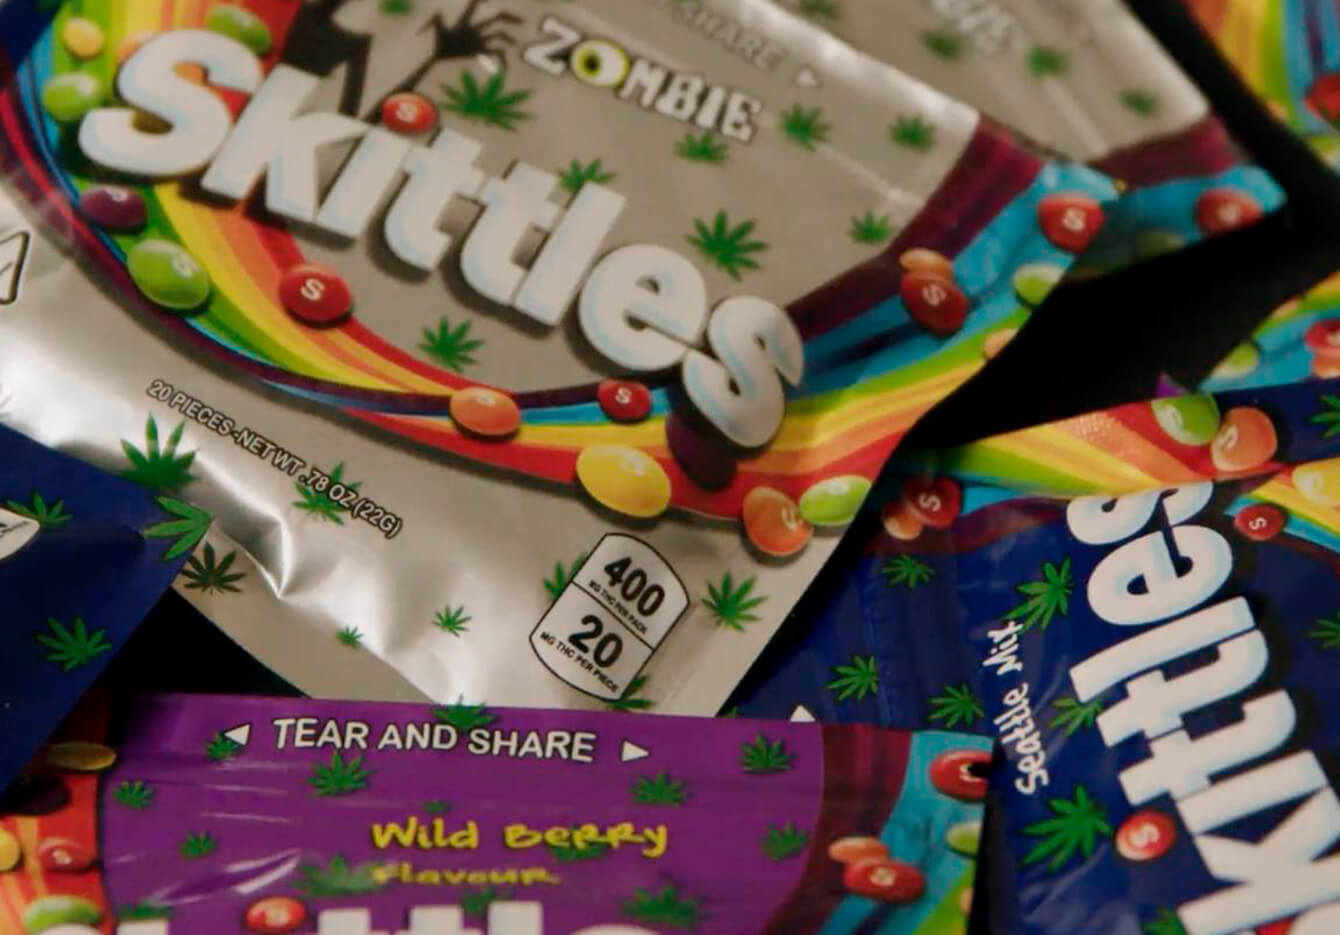 Photo of Unregulated edible cannabis product resembling Skittles